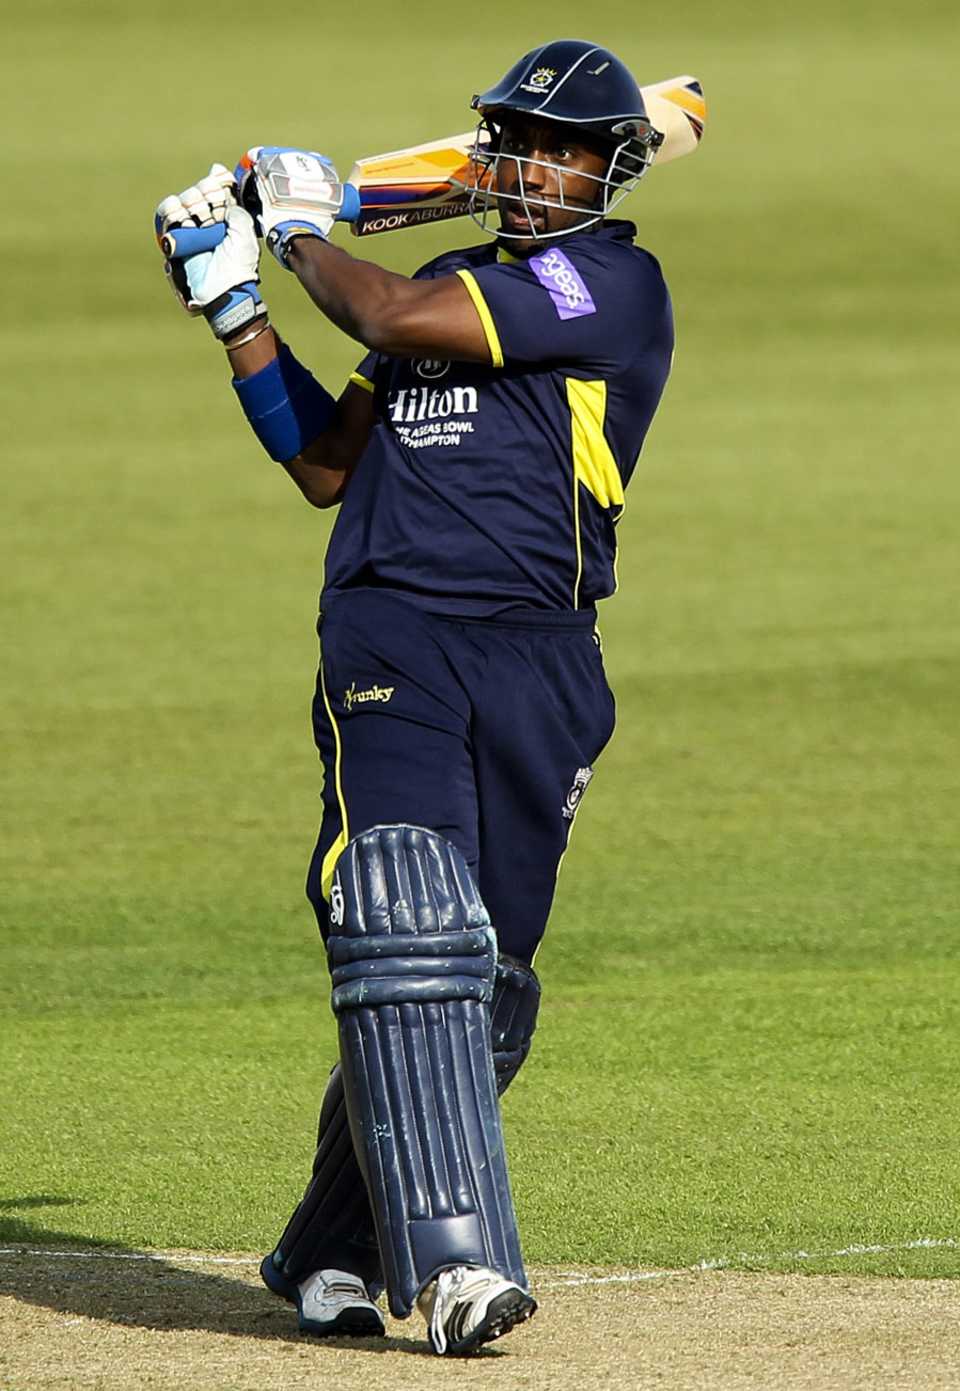 Michael Carberry fell four runs short of a century, Hampshire v Durham, Yorkshire Bank 40, Ageas Bowl, May 19, 2013